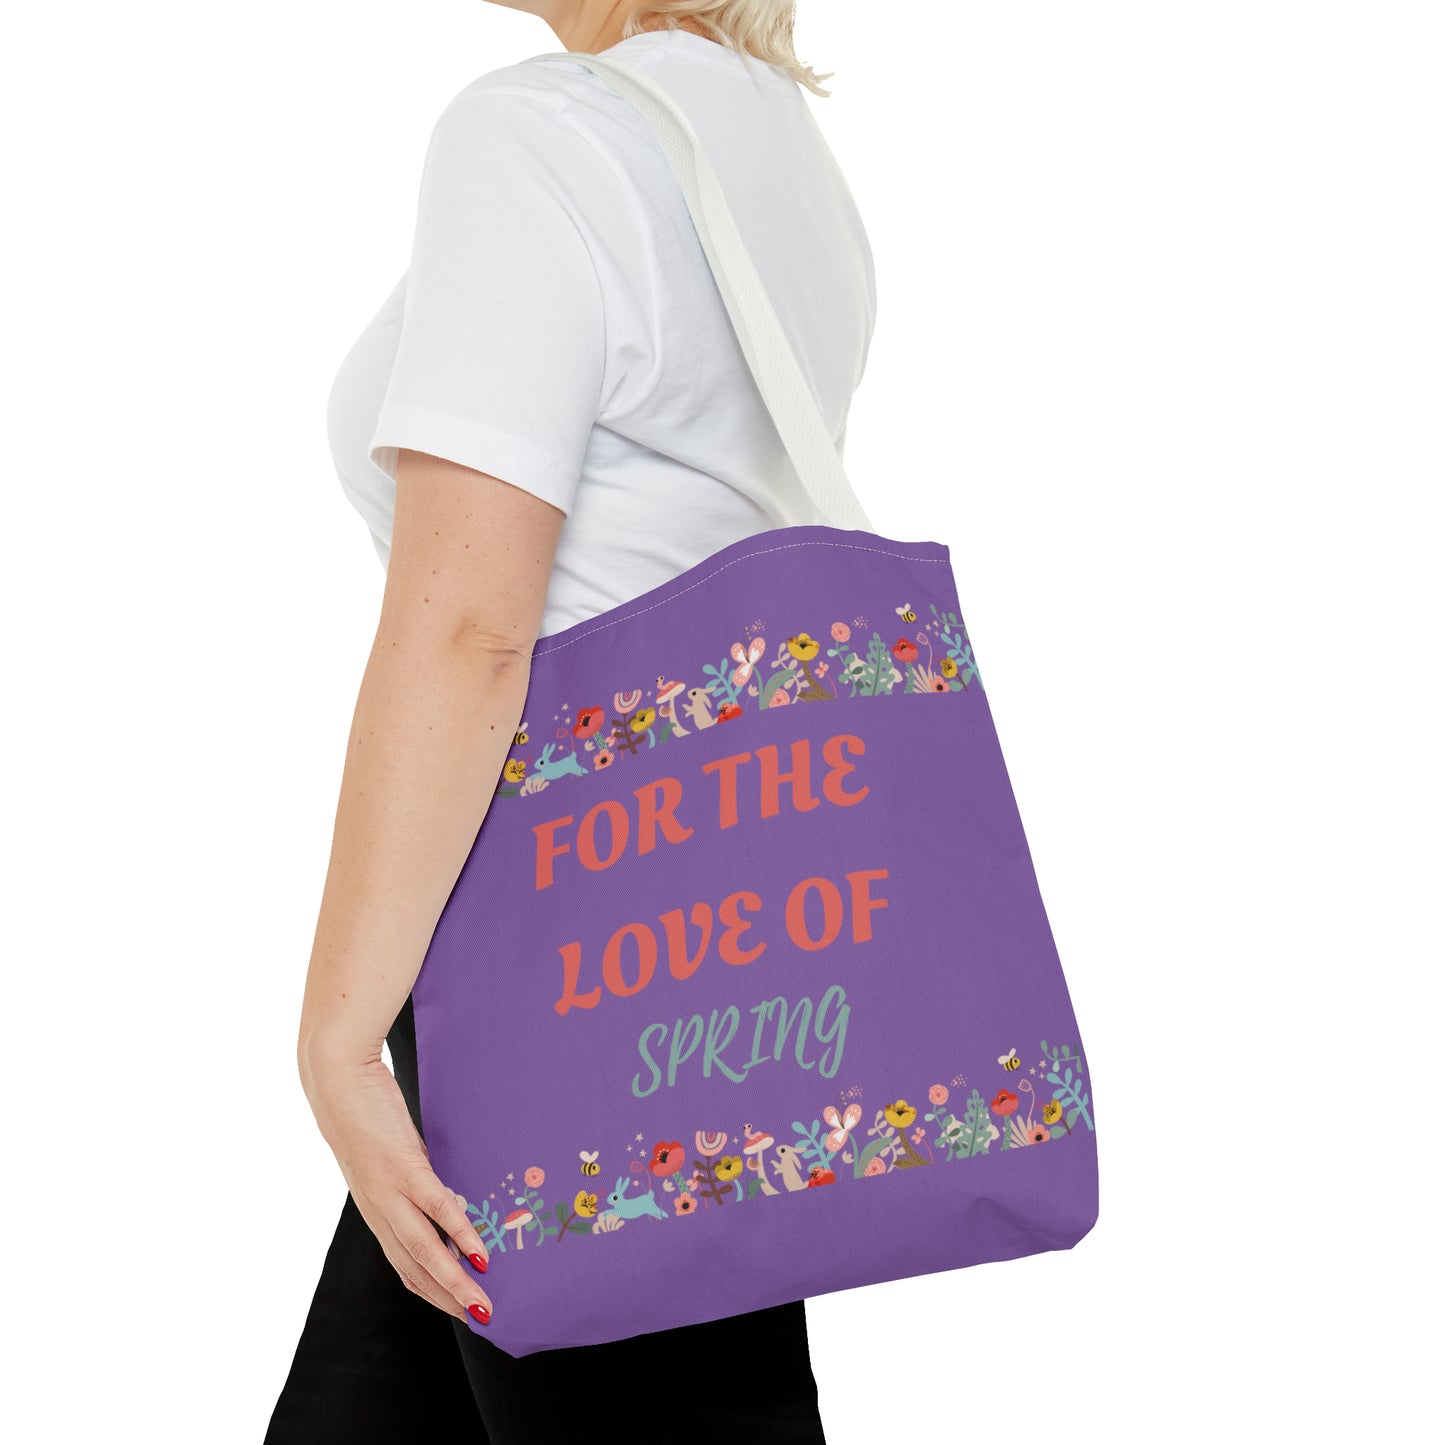 For The Love of Spring - Purple Tote Bag (AOP)